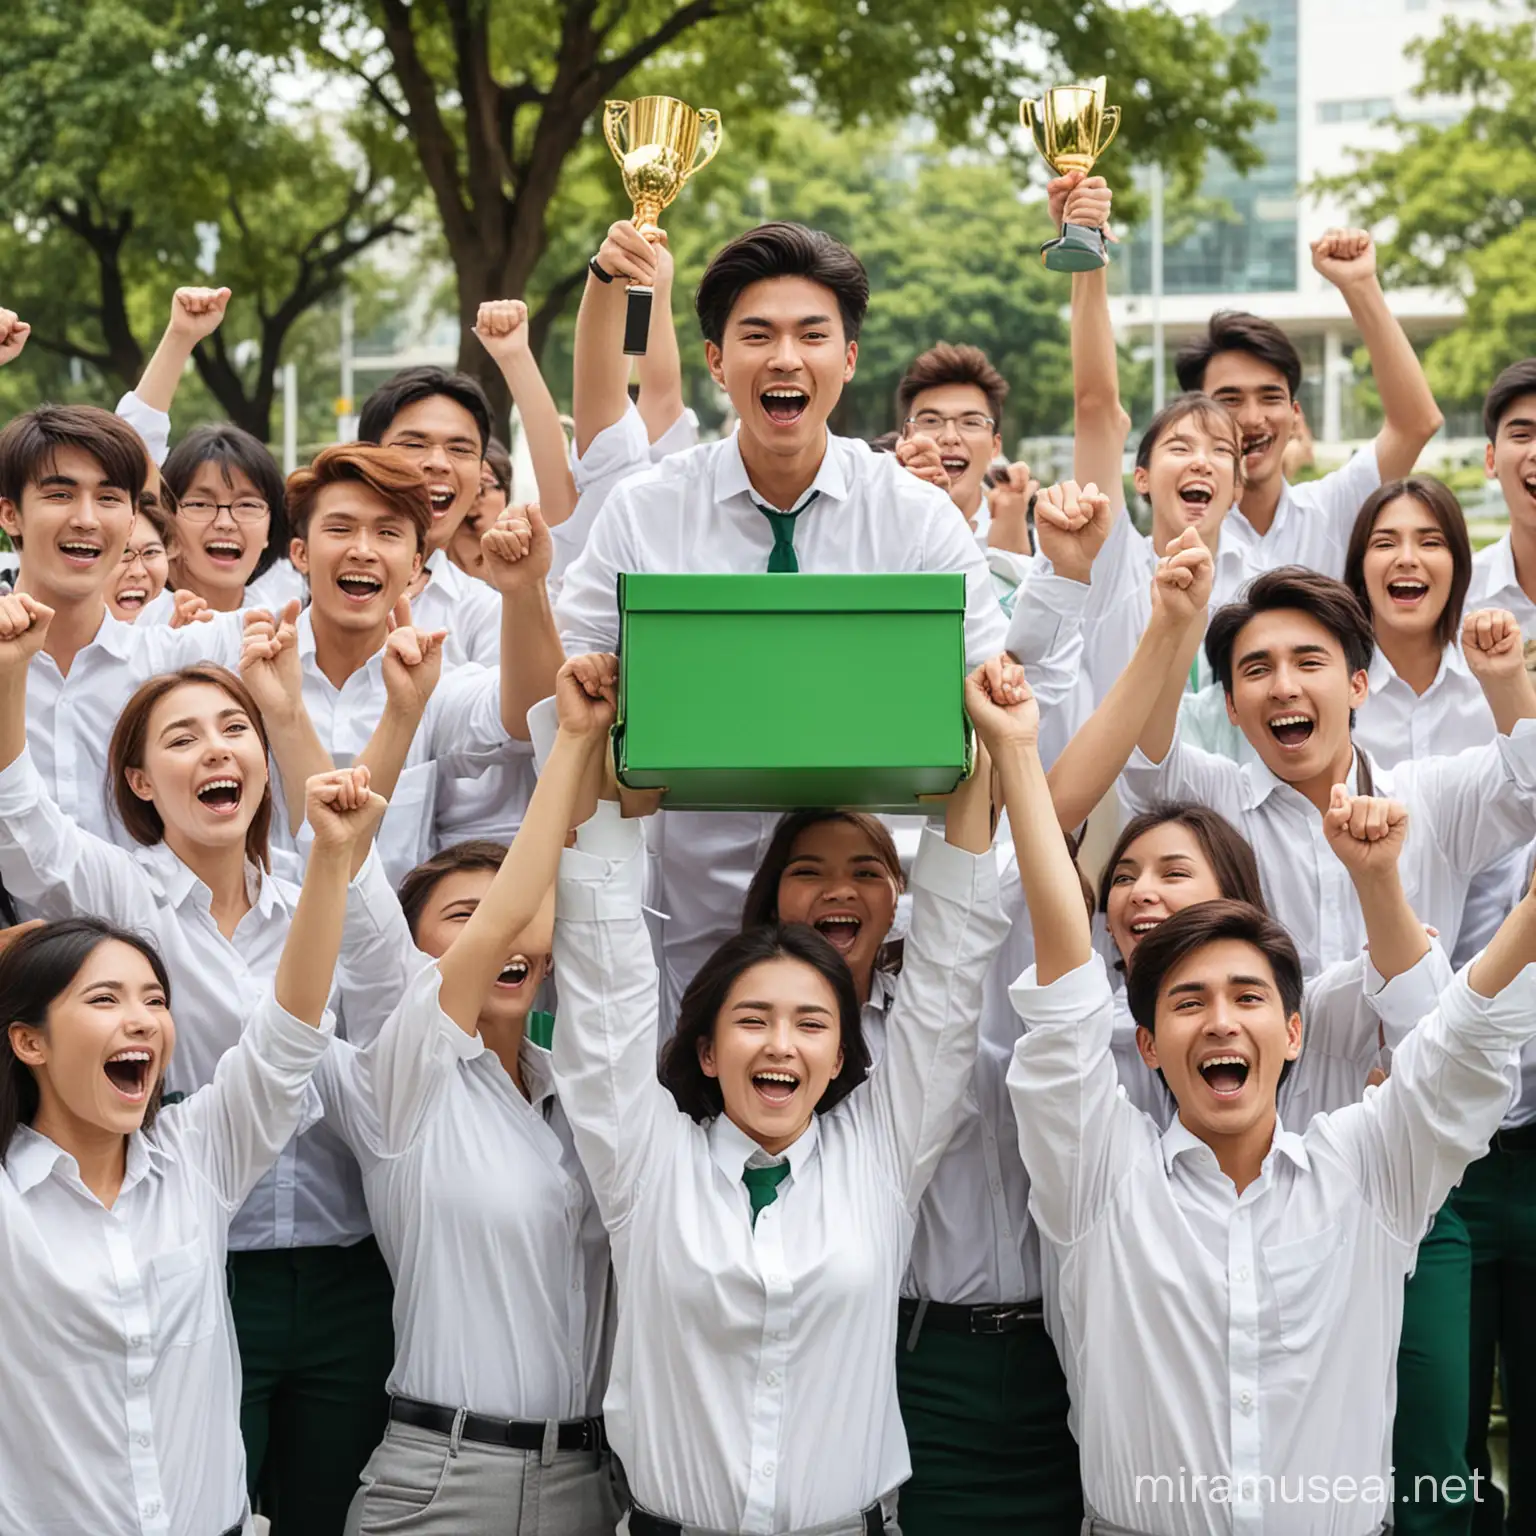 University students are all wearing plain white shirts are jubilating for winning a competition, one of them is lifting a green box like a trophy.